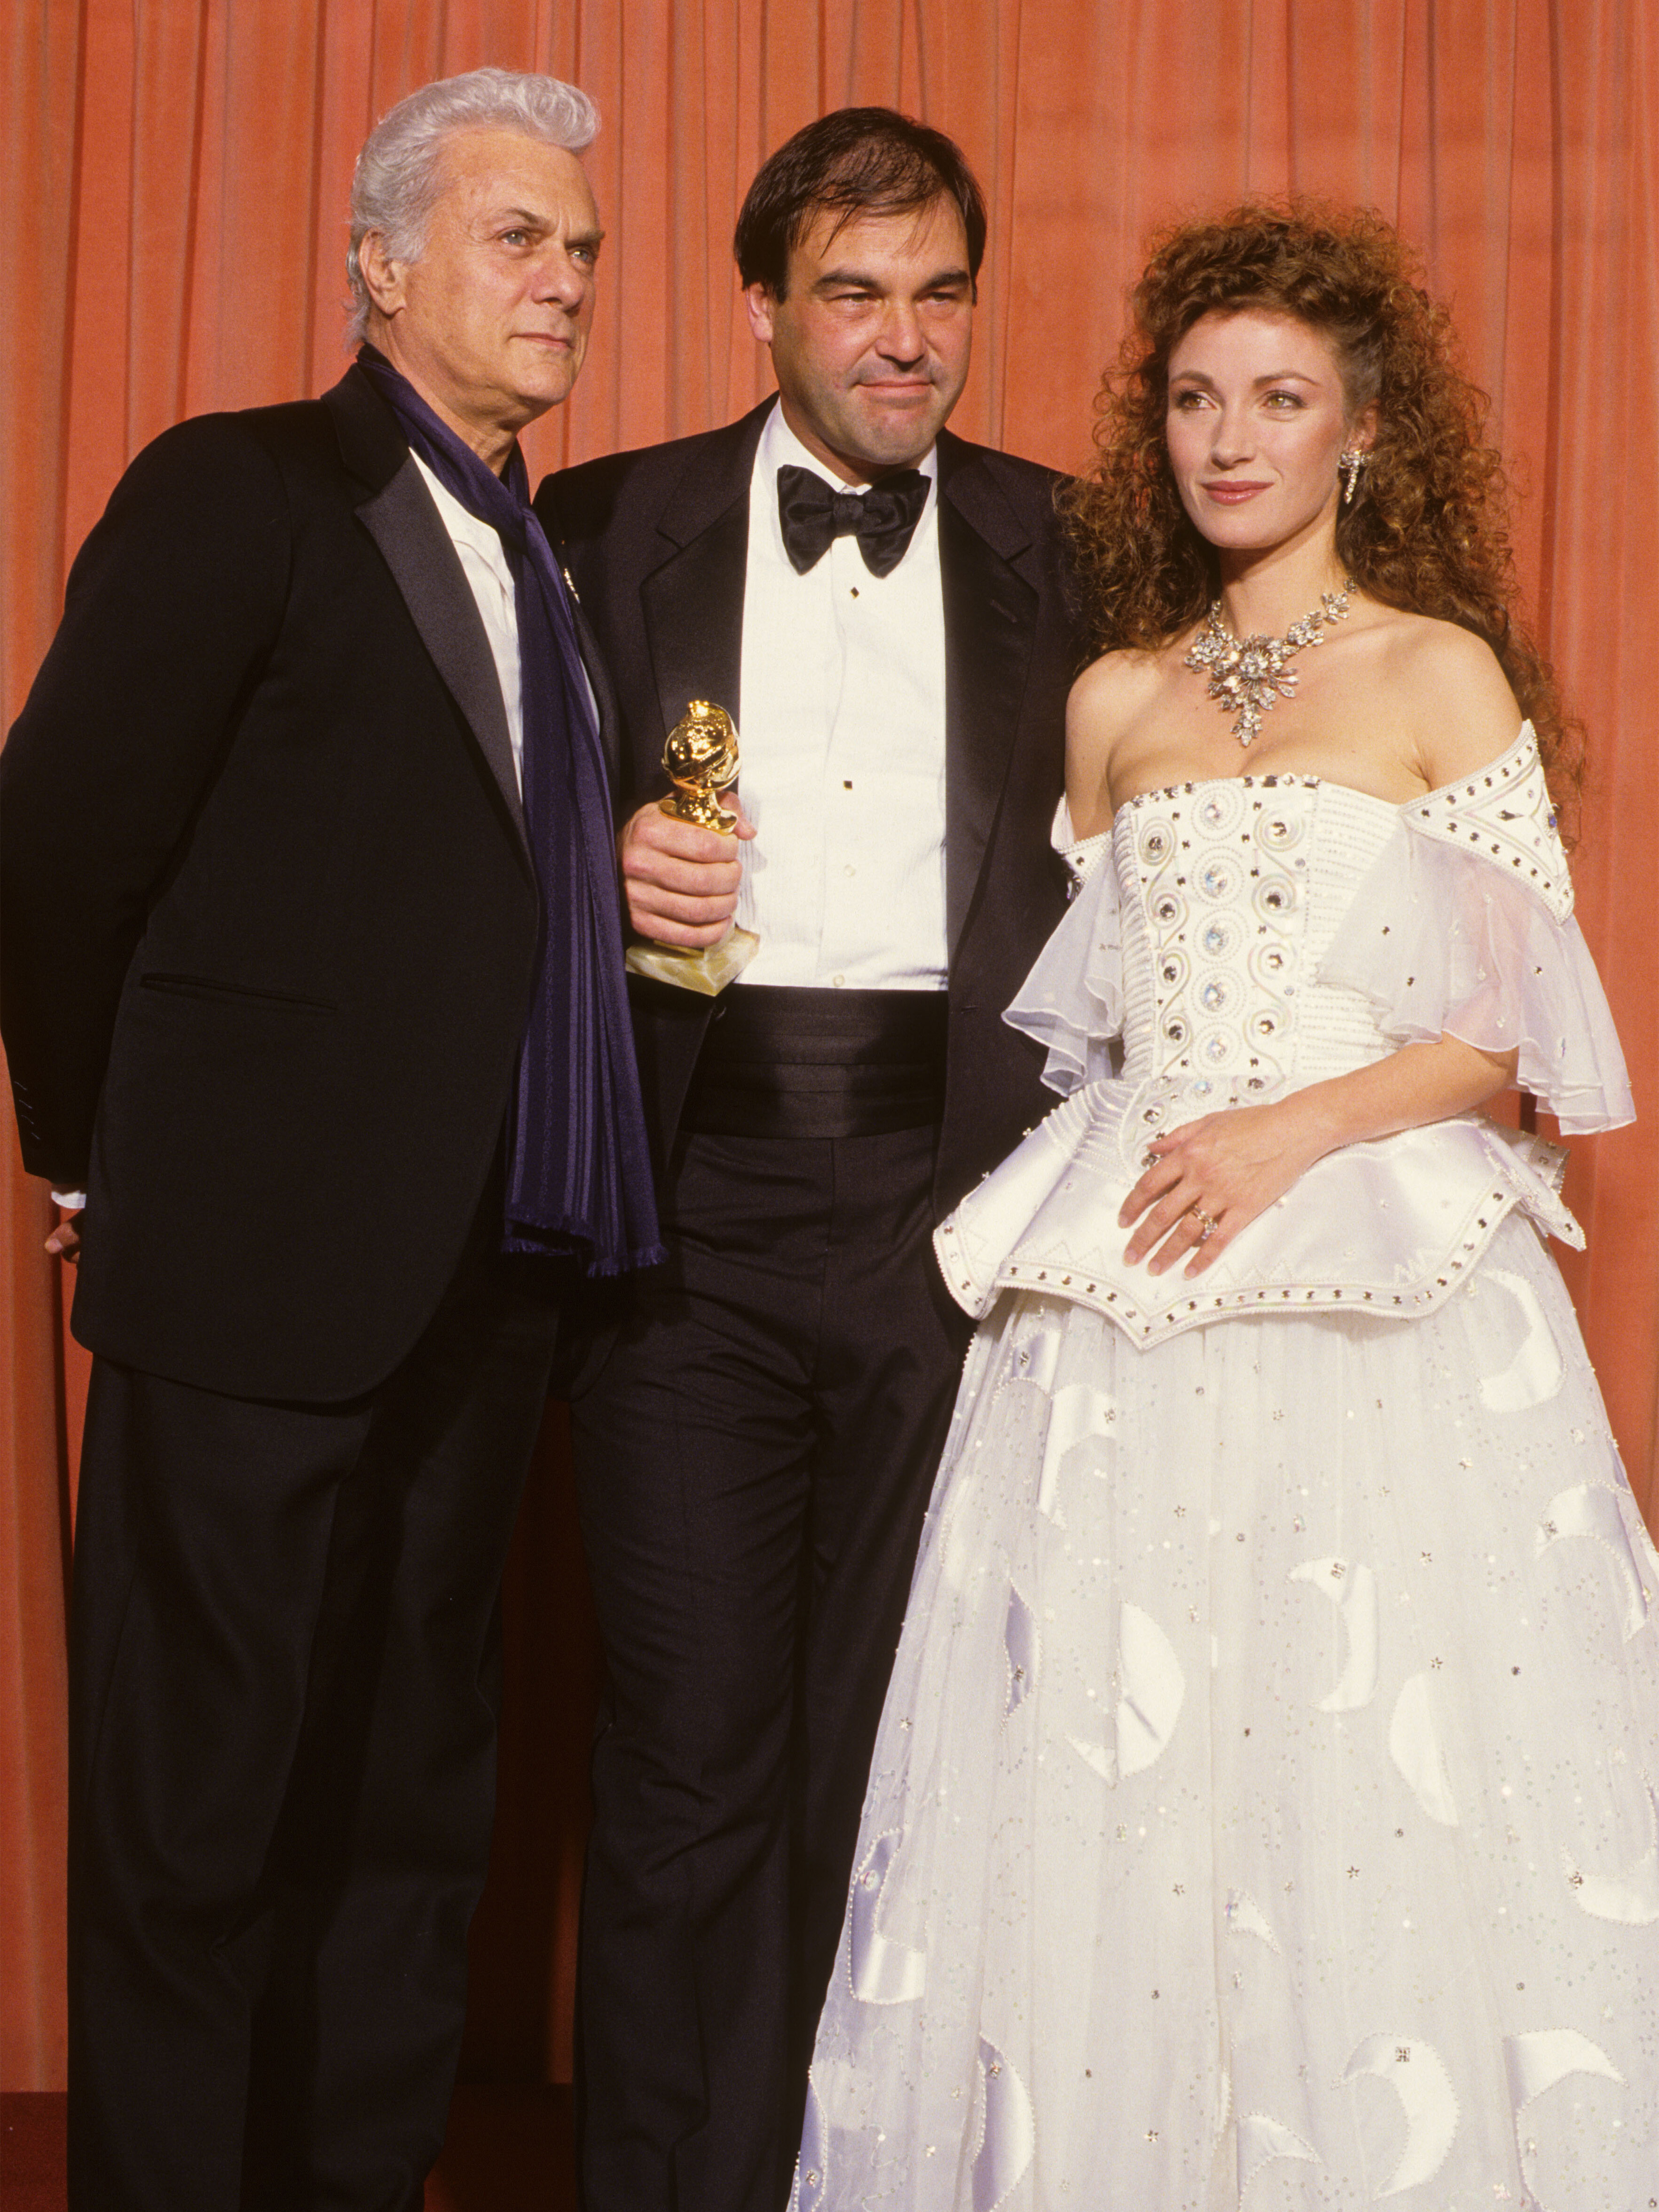 1987 Oliver Stone, Tony Curtis, and Jane Seymour, 44th Golden Globes